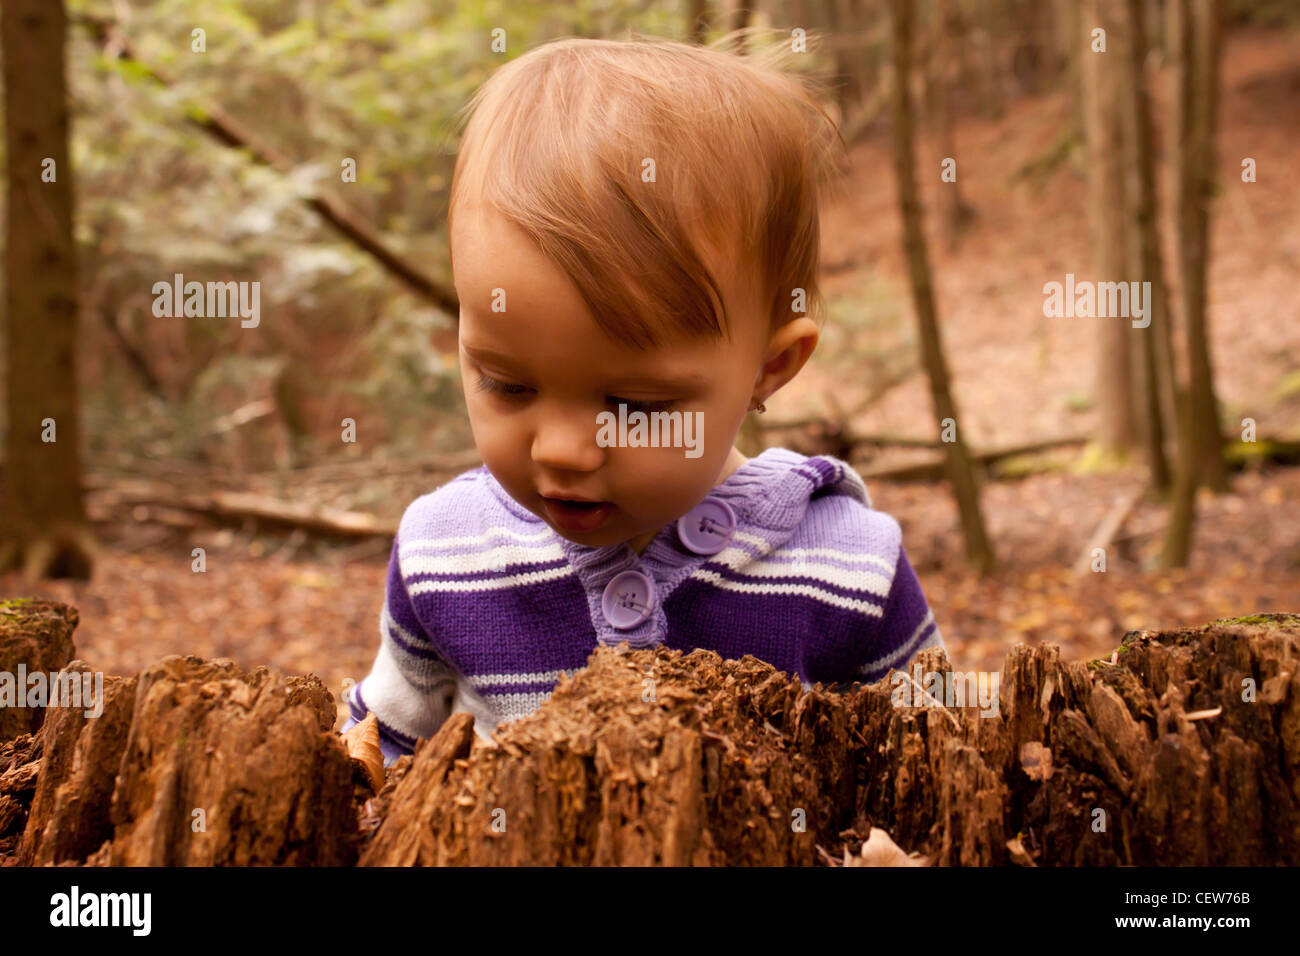 Curious child looking at stump in forest Stock Photo